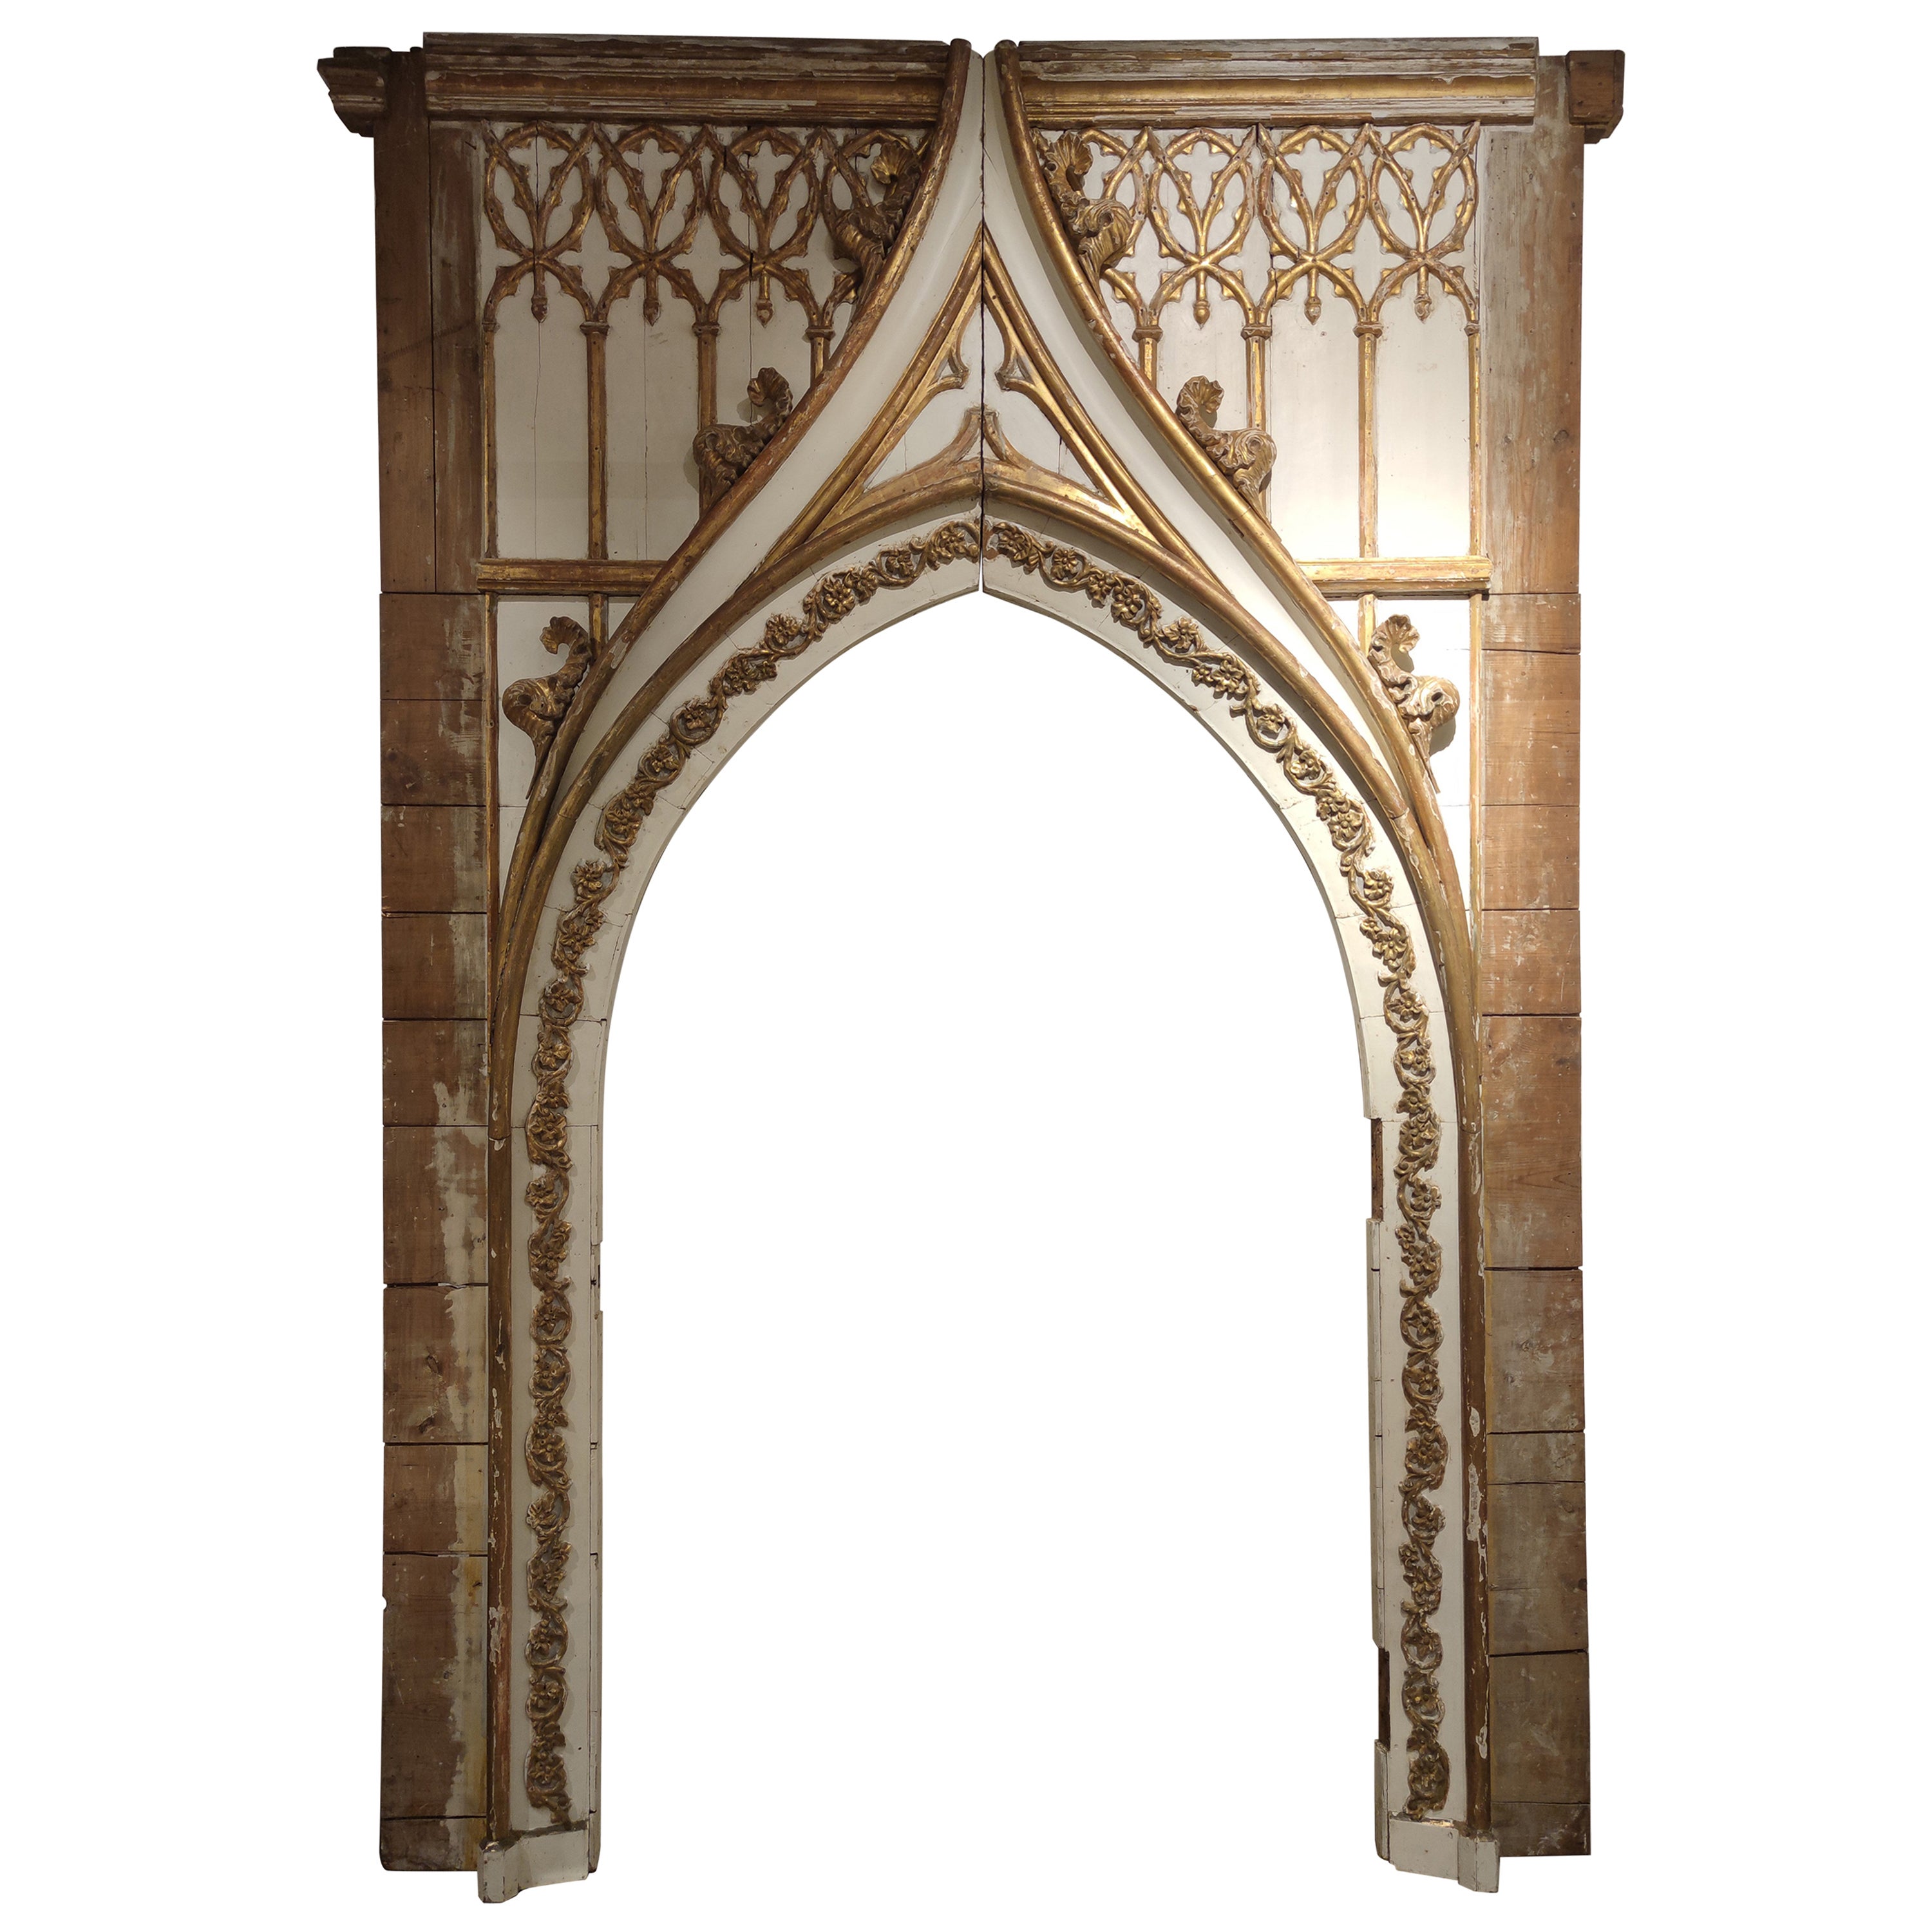 19th Century, Spanish Neogothic Hand-Carved and Polychromed Wooden Arch